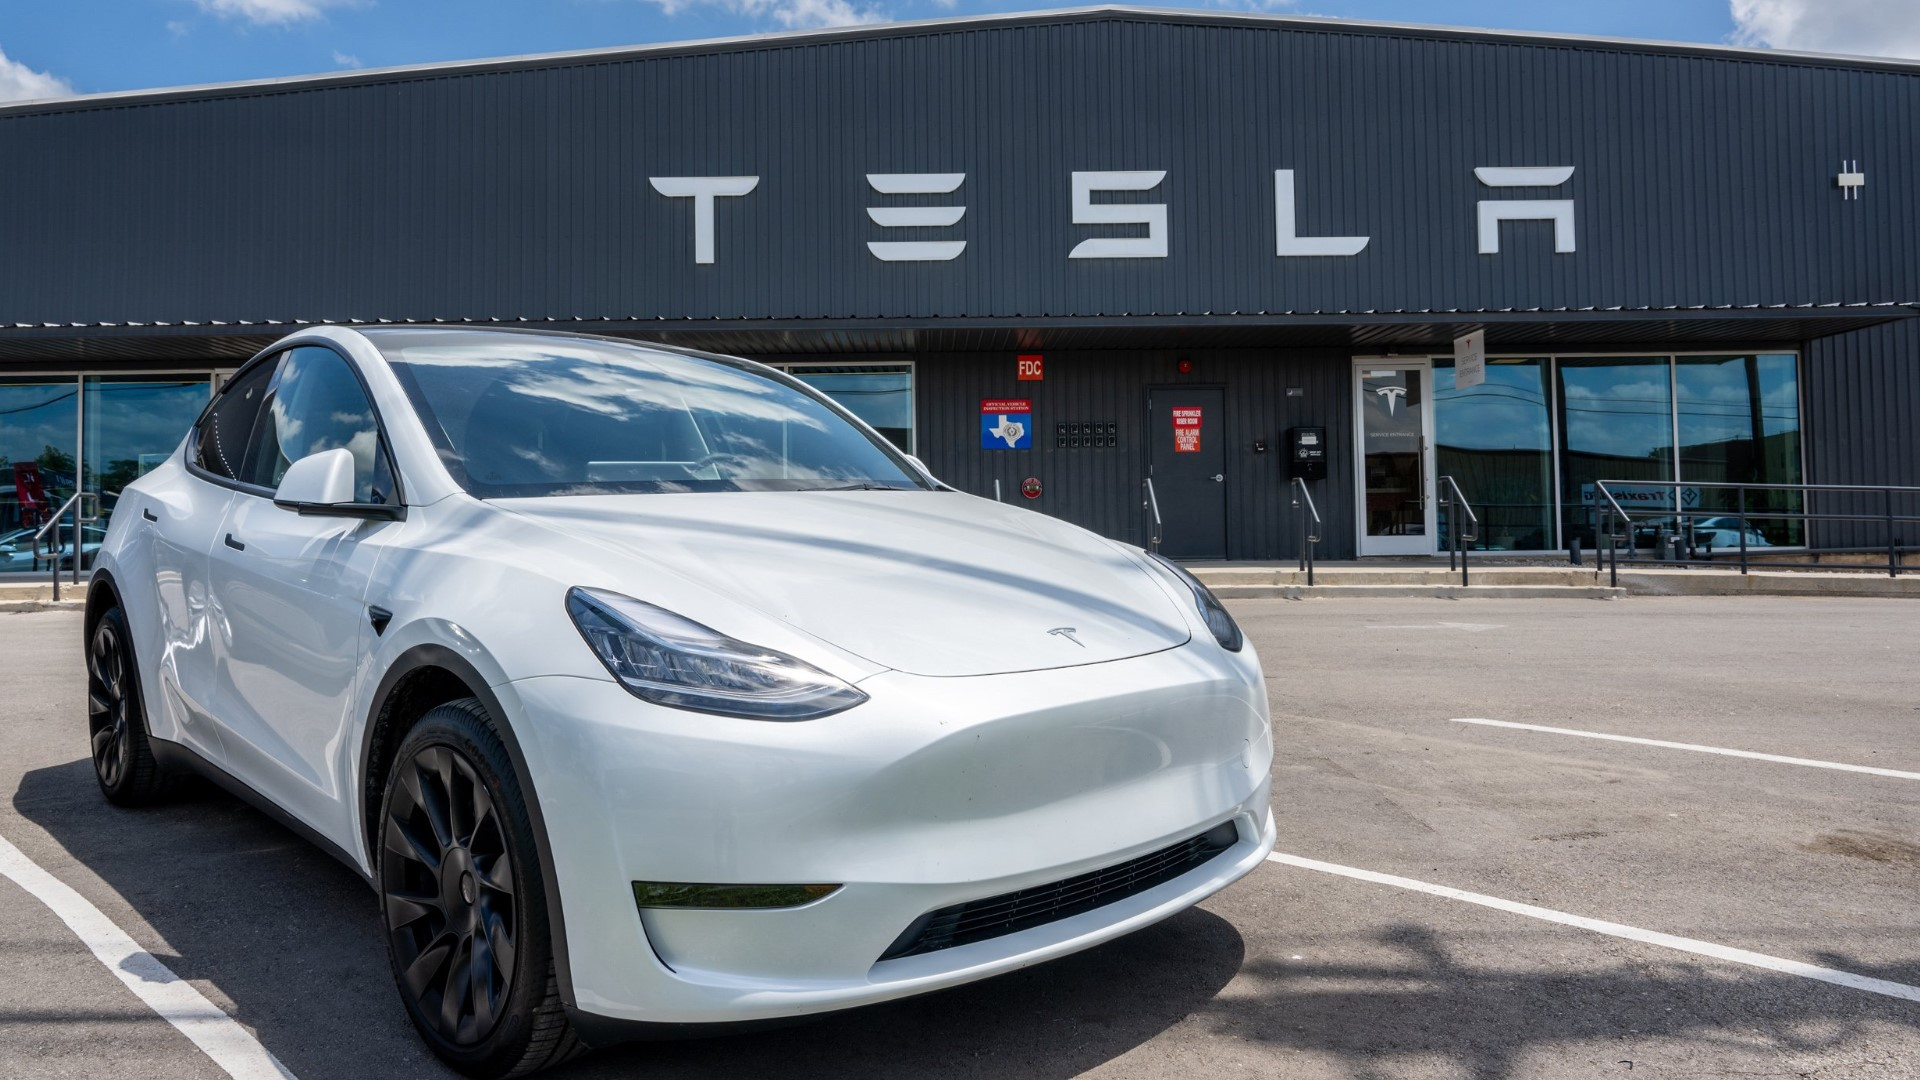 Tesla's New Electric Vehicle Target for 2025 Announced